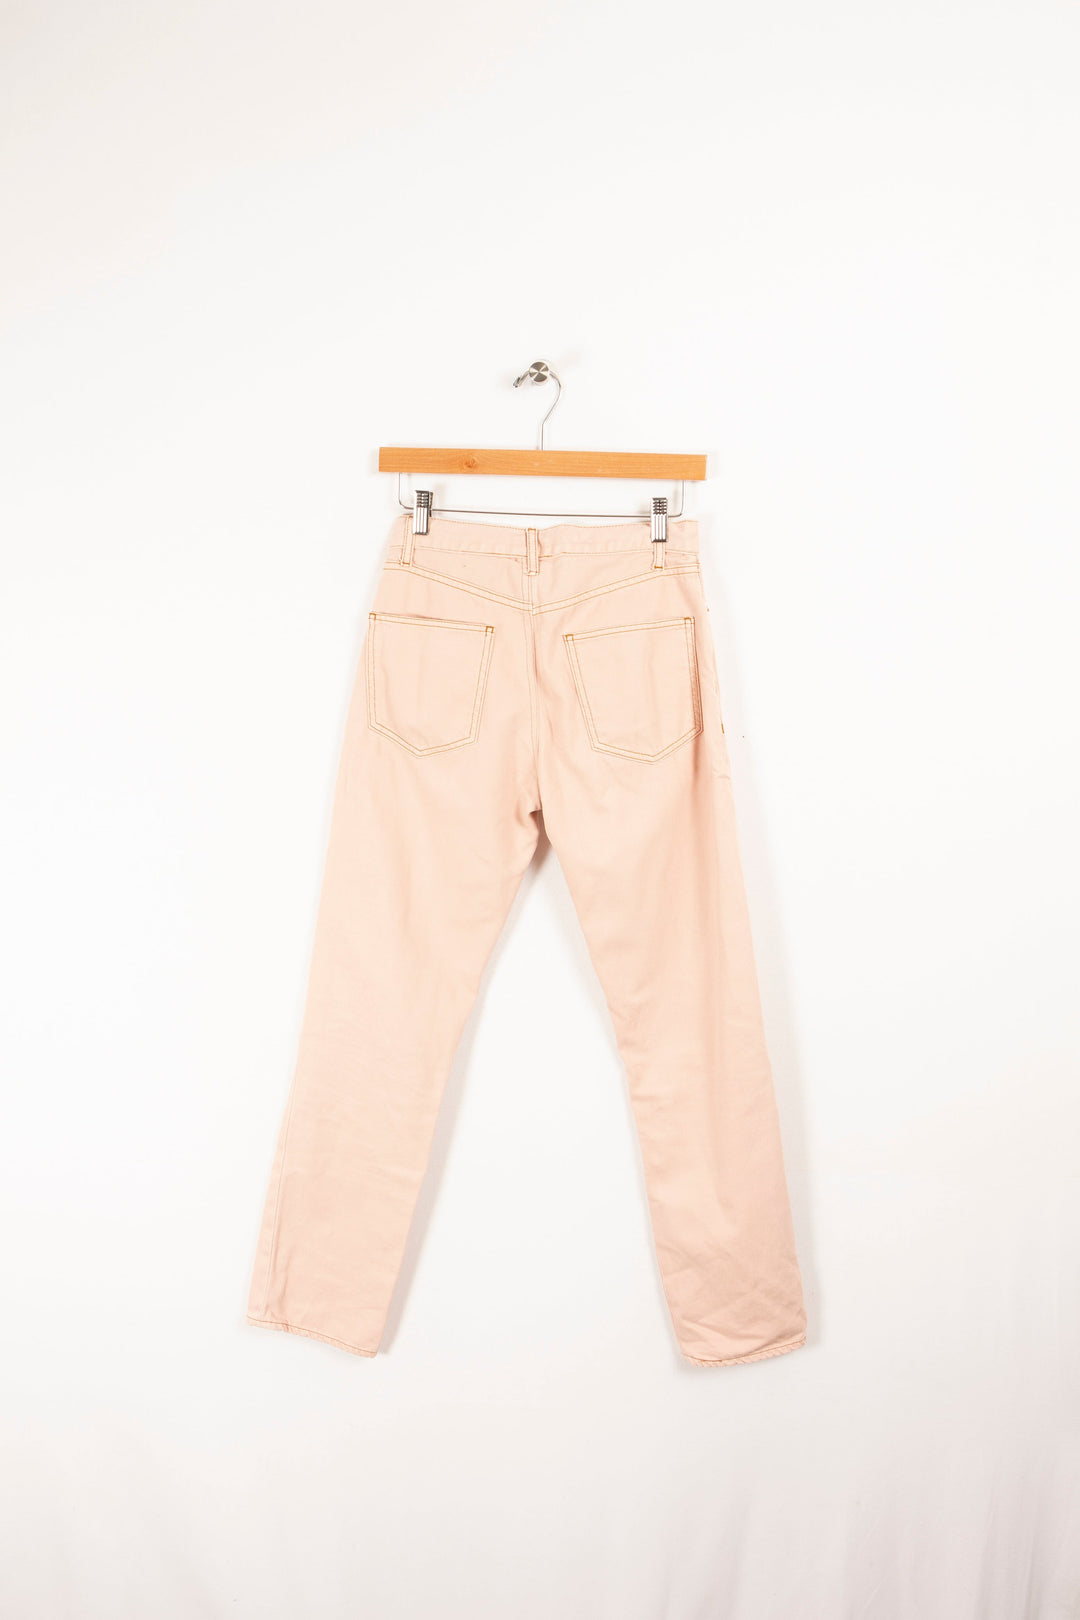 Pink jeans - XS / 34